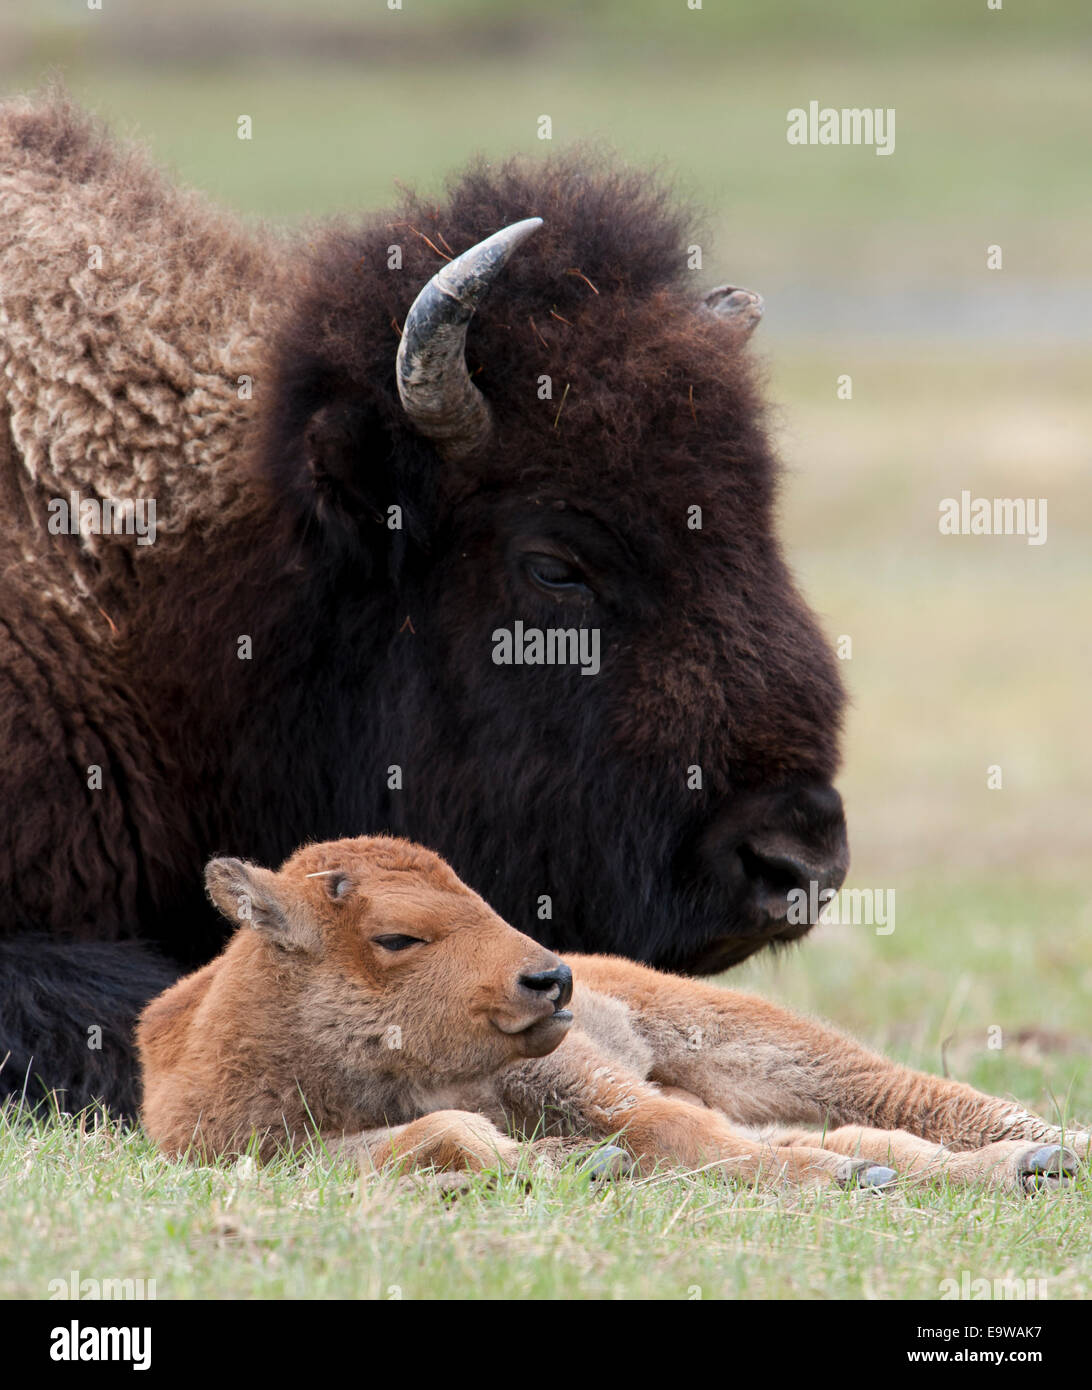 A bison (Bison bison) cow resting with her calf, Yellowstone National Park, Wyoming Stock Photo